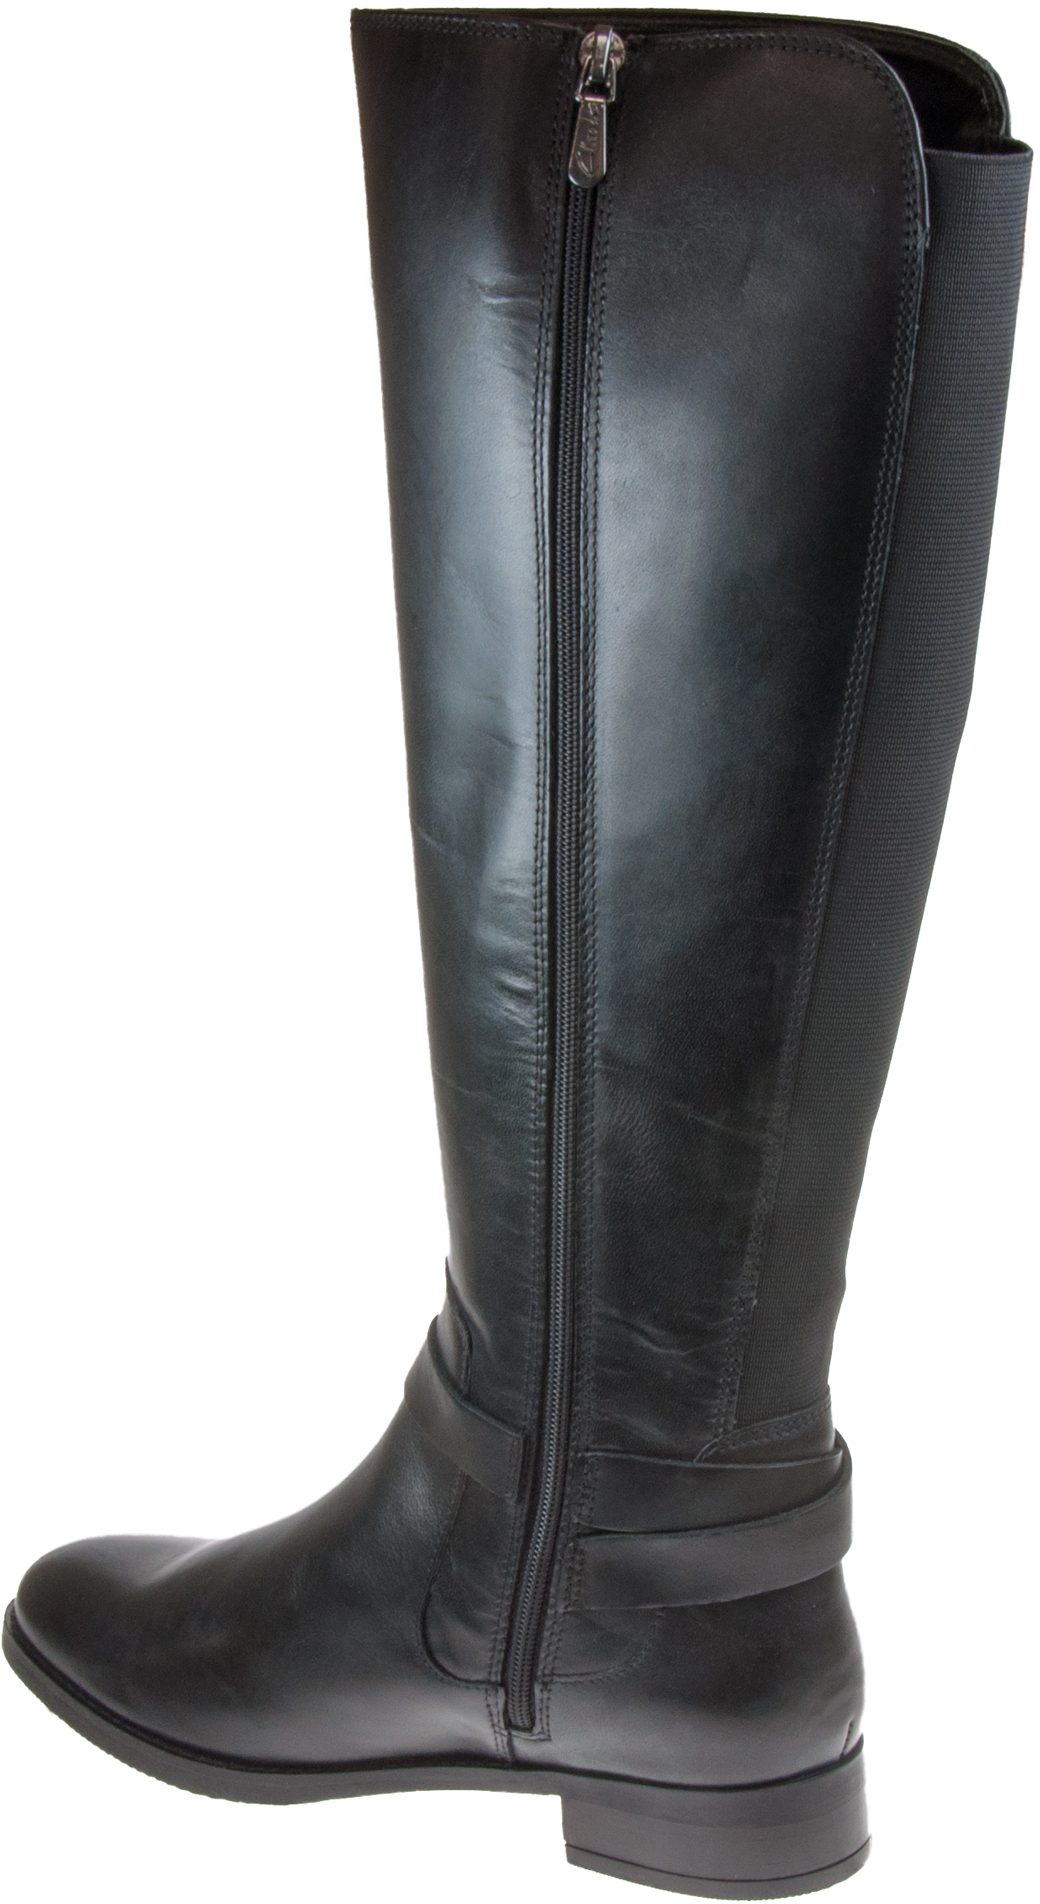 Clarks Netley Whirl Black Leather 26144986 - Knee High Boots ...